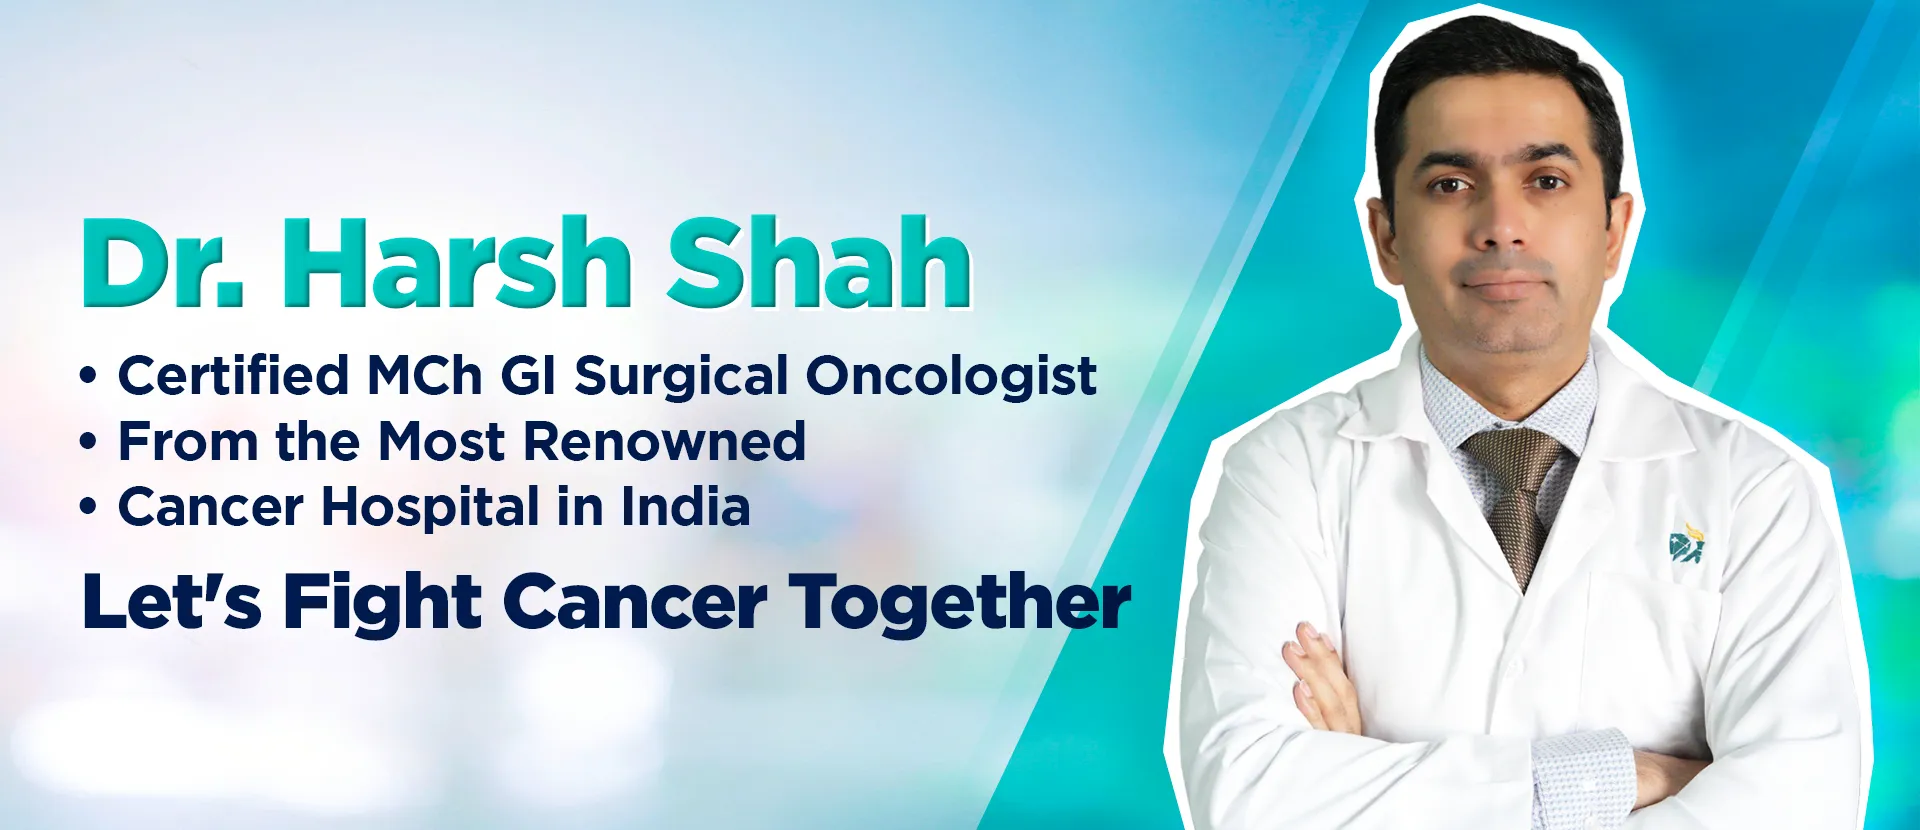 Best Robotic Cancer Specialist Doctor in Ahmedabad, Gujarat, India